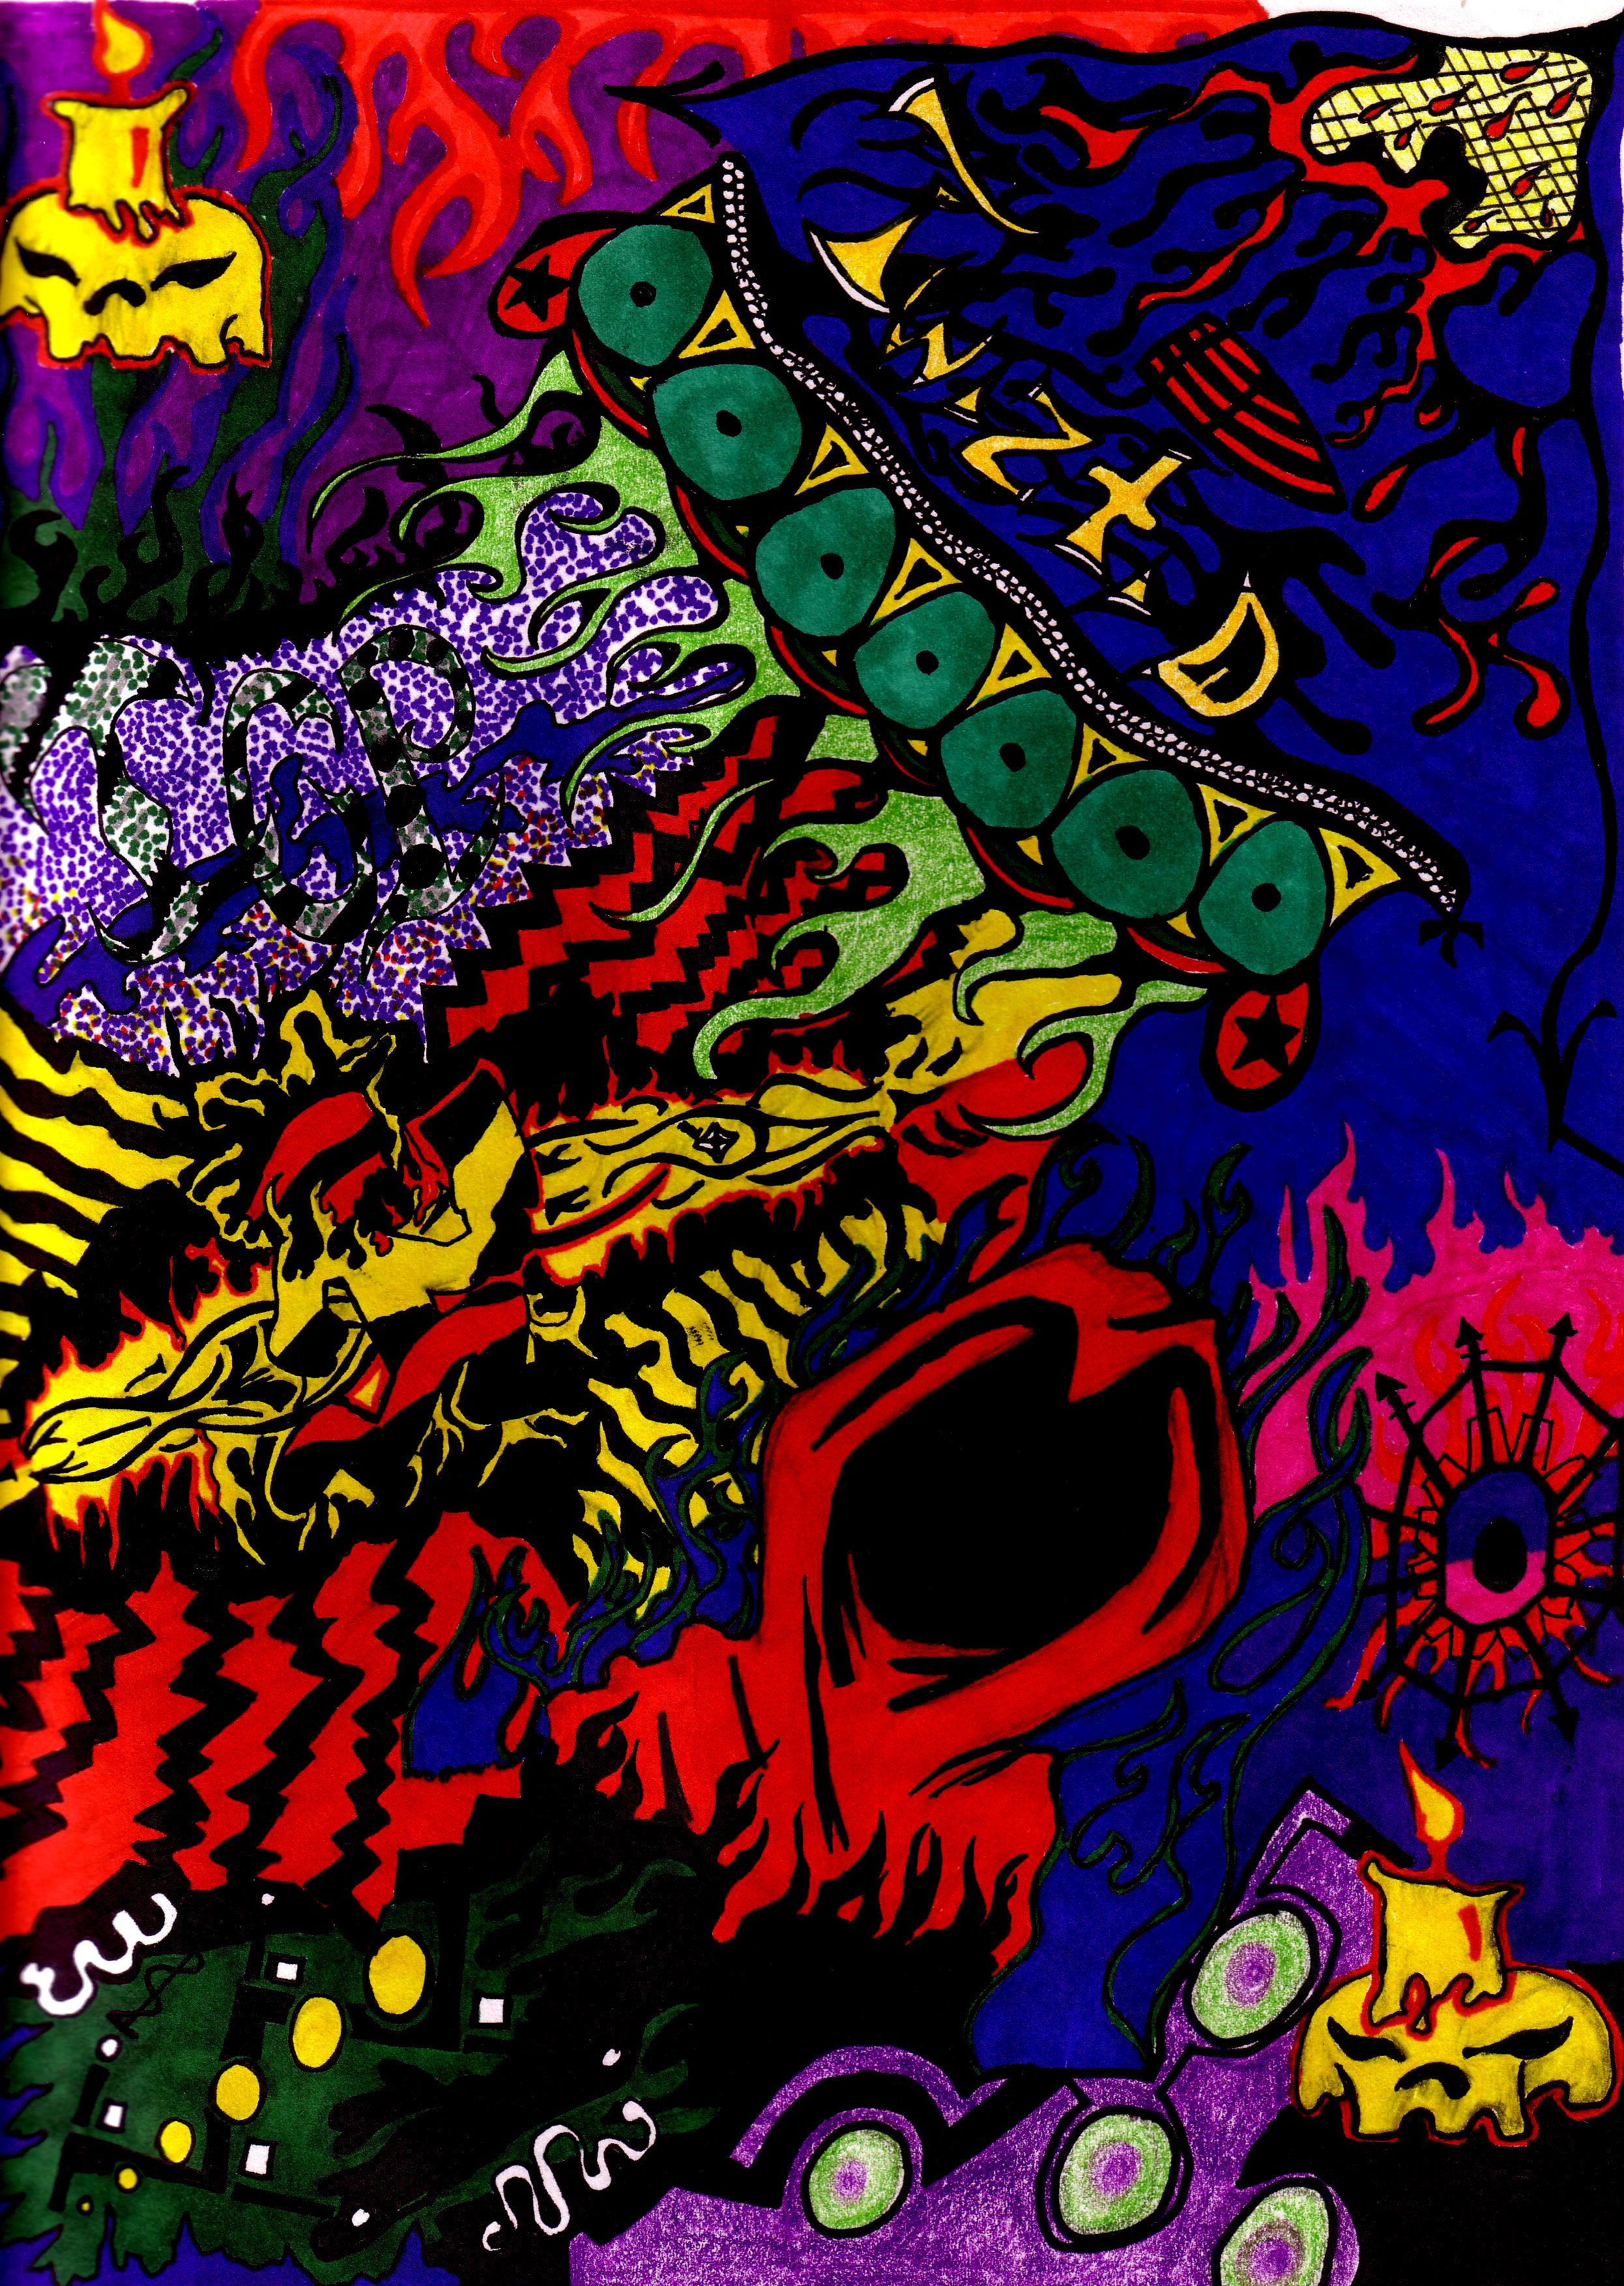 Free download Insane Clown Posse Wallpaper Icp drawing1 by michaelb5201 [2492x3507] for your Desktop, Mobile & Tablet. Explore Free Insane Clown Posse Wallpaper. Clown Wallpaper Free, Creepy Clown Wallpaper